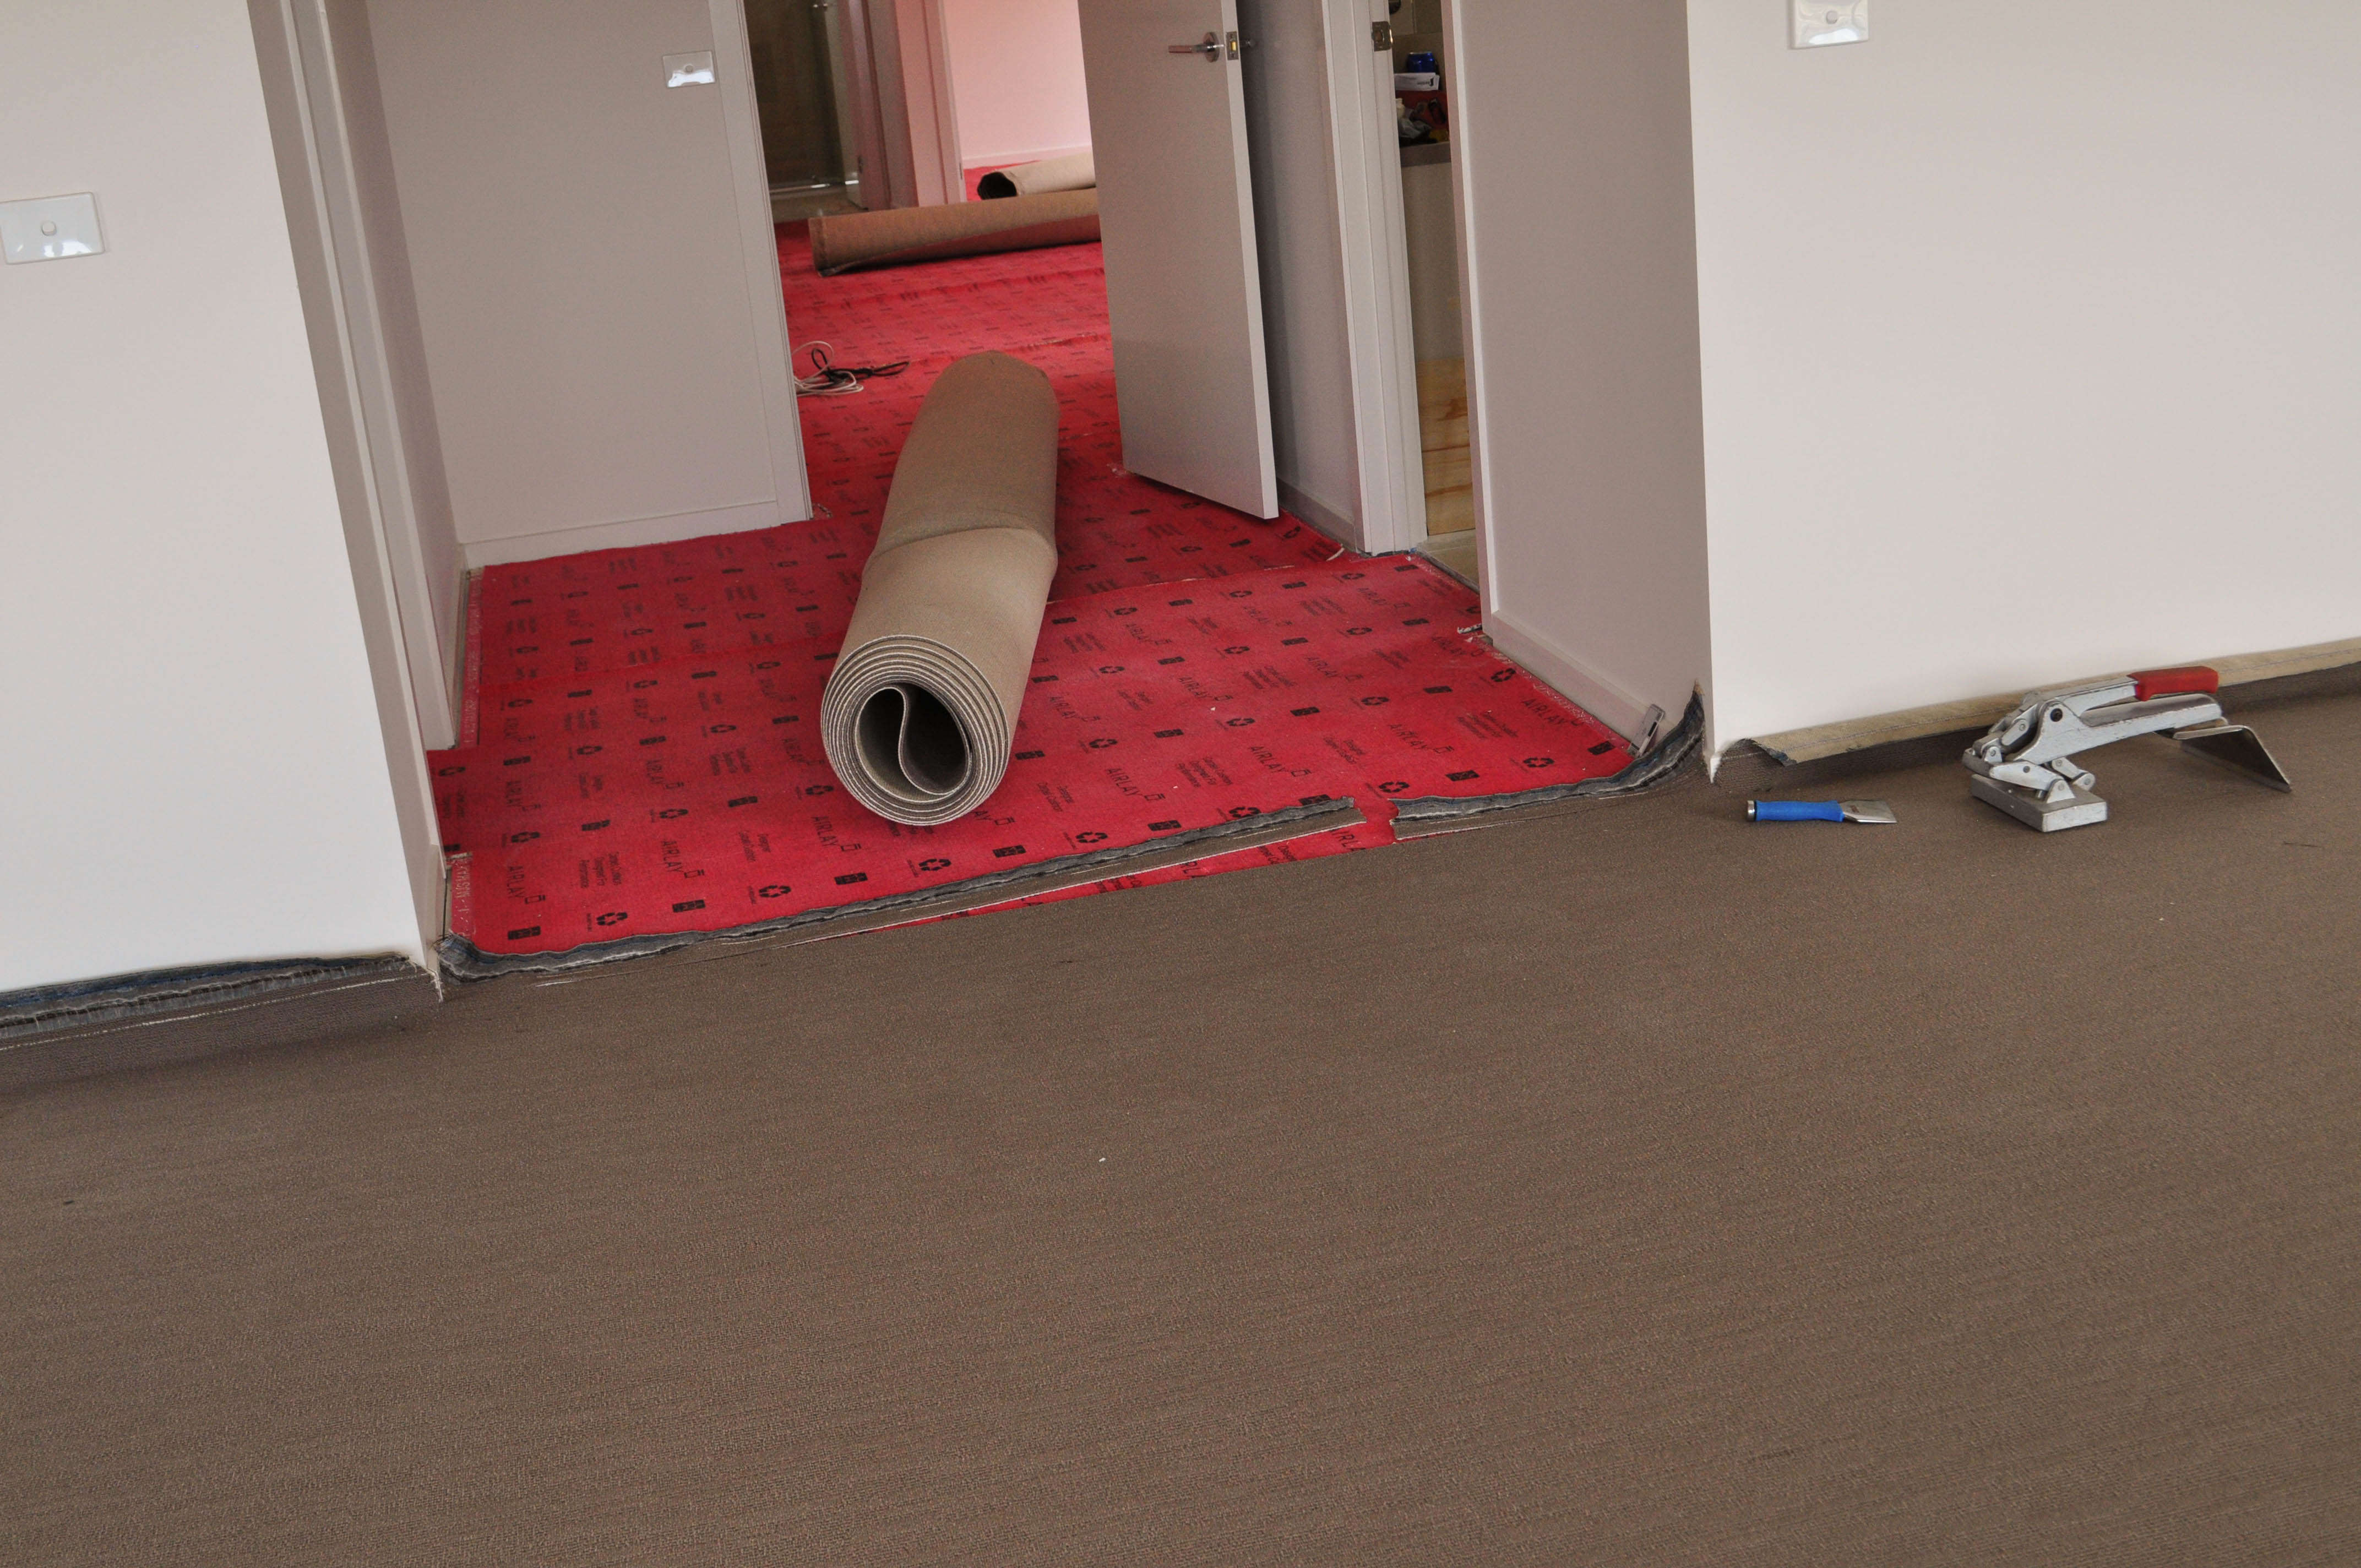 showing the work of the installer Concord Floors installing carpet in a lounge room from which a wide passage runs. The passage has gripper on the floor against the walls and underlay
 between the gripper covering the whole floor. On top of the underlay is a roll of carpet pre-cut to size ready to be laid on the floor. The lounge room has carpet stretched and tensioned ready to be joined to the passage carpet. 
 The carpet laying in full swing as part of the carpet installation procedure. The home is in Point Cook, Werribee.